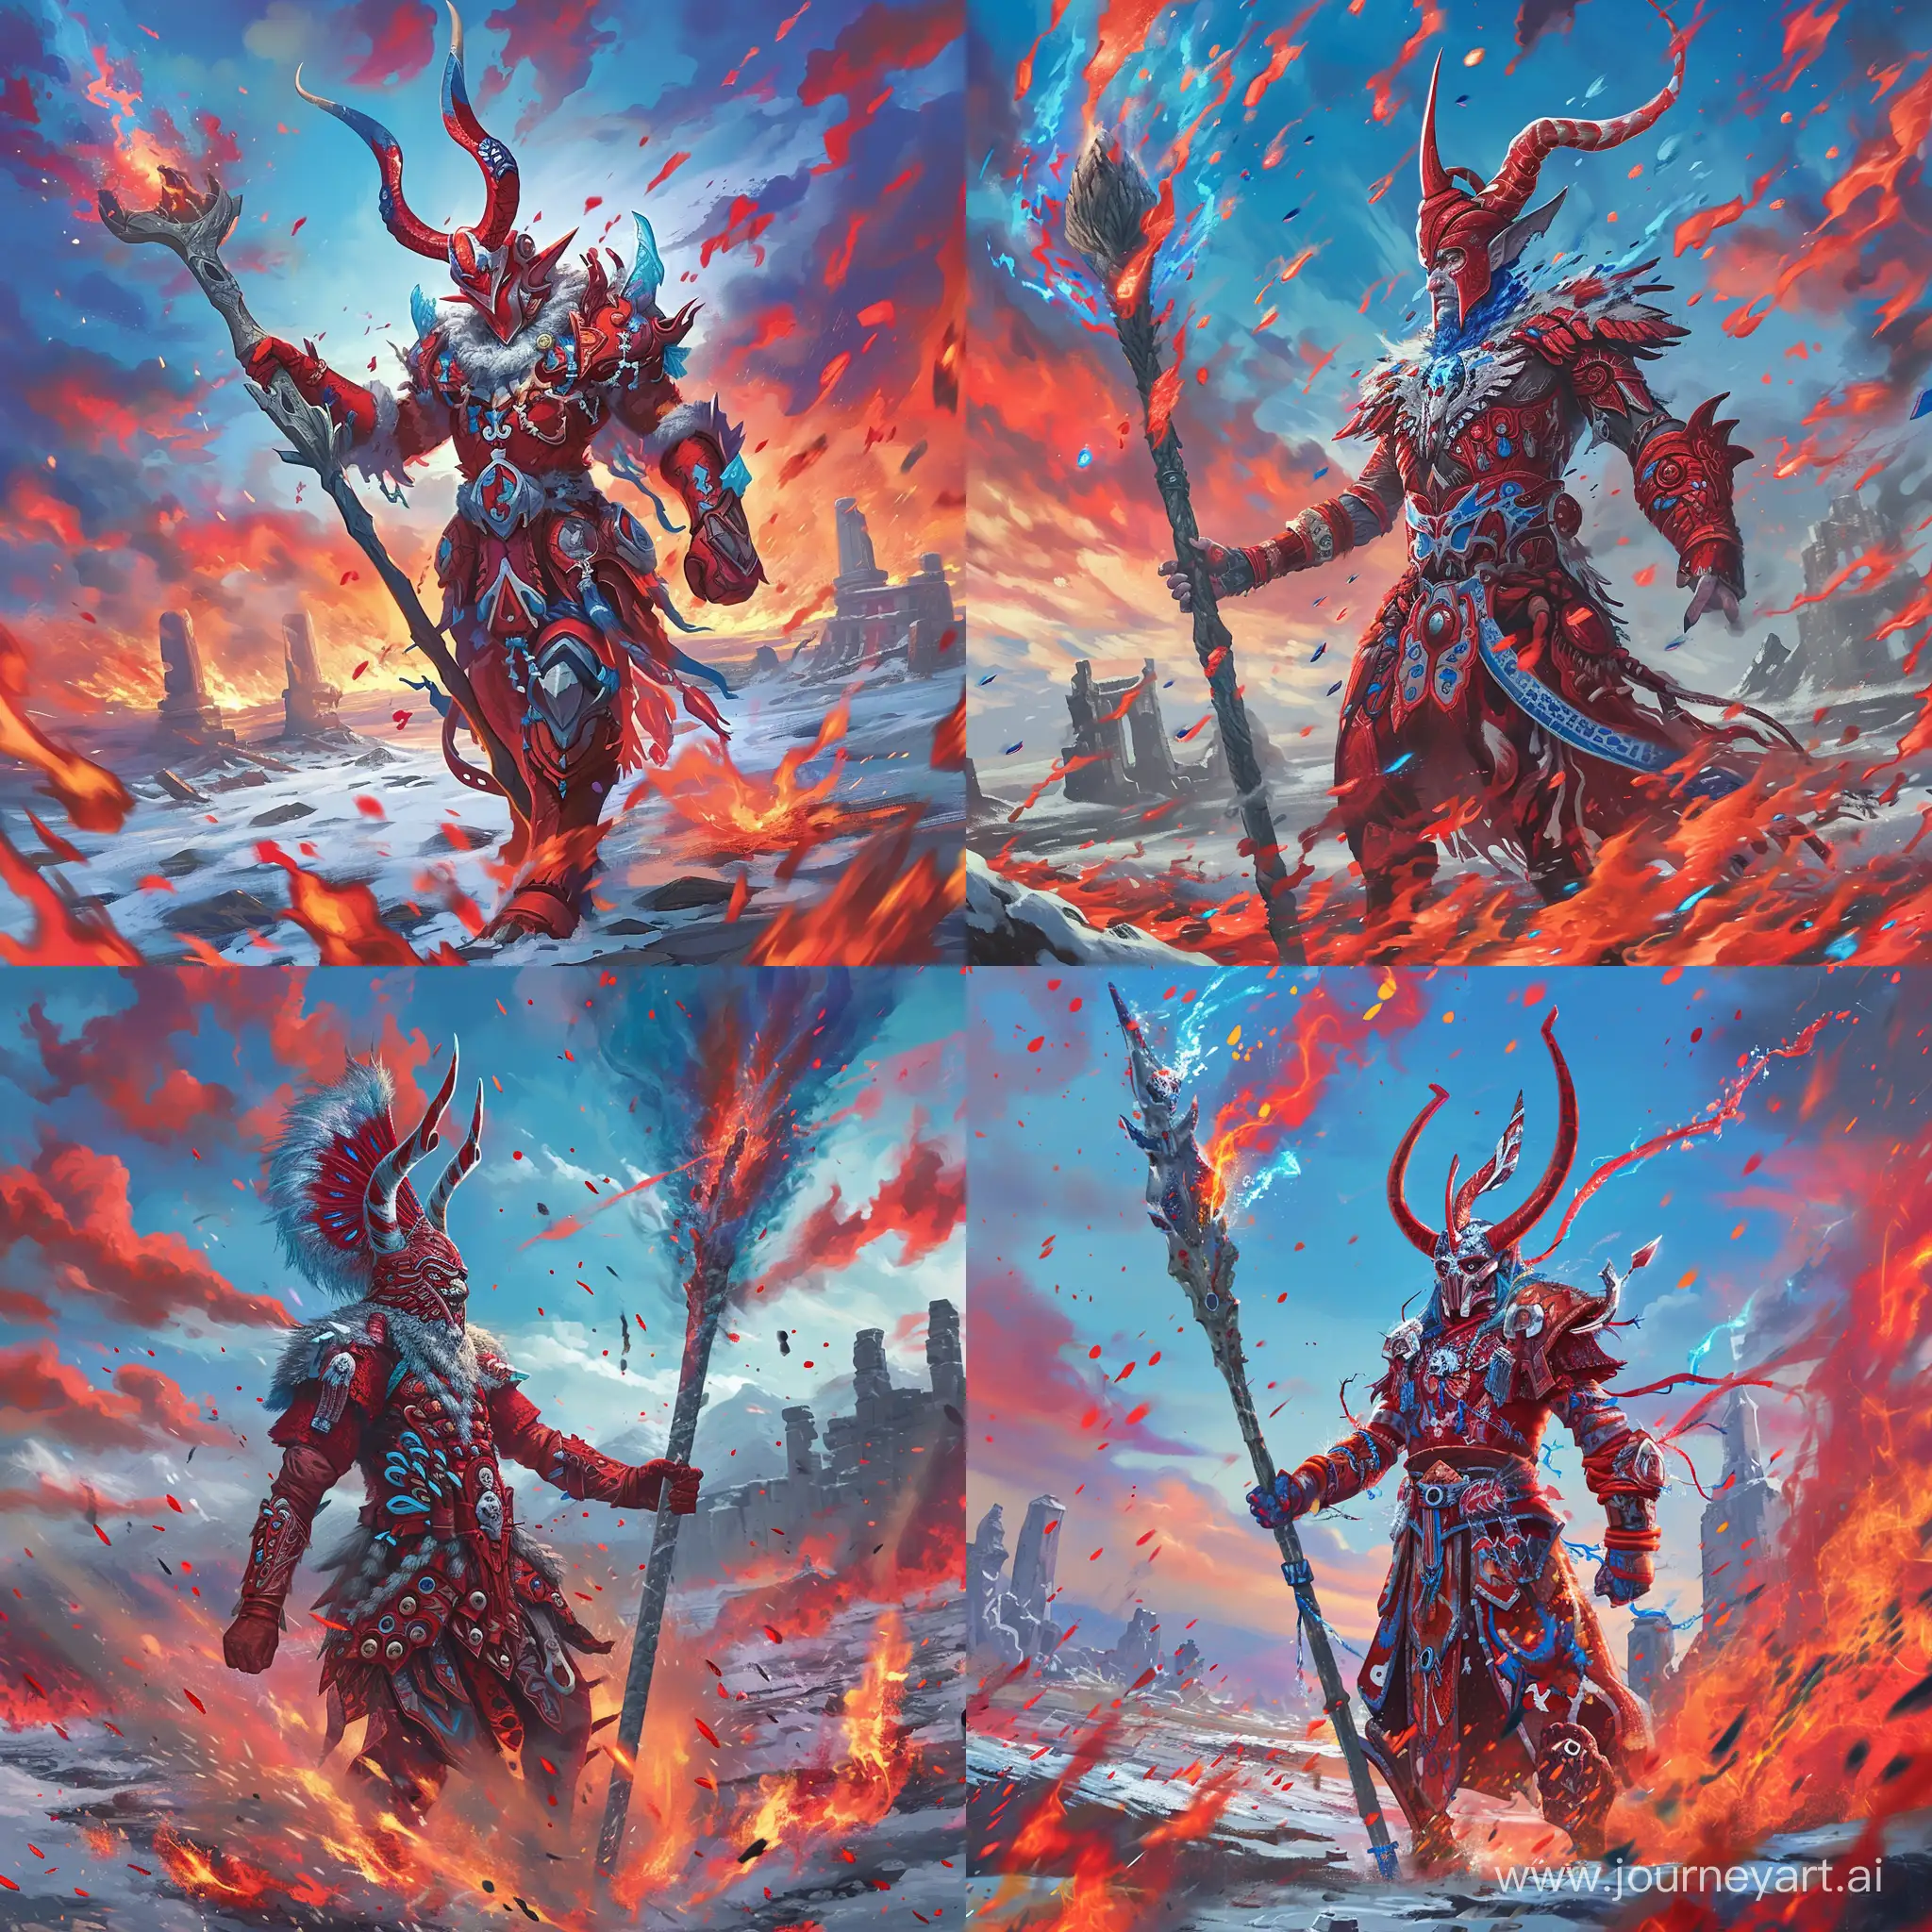 A warrior with a large staff stands in a fiery landscape. The sky is blue with red clouds, and the warrior wears a red armor with white and blue accents. The warrior also has a red helmet with tall horns and red, white, and blue patterns. The staff the warrior is holding is gray with a black and white pattern. The warrior is surrounded by red and blue flames, and there are red and blue sparks flying around. In the background, there are ruins covered in snow. --v 6